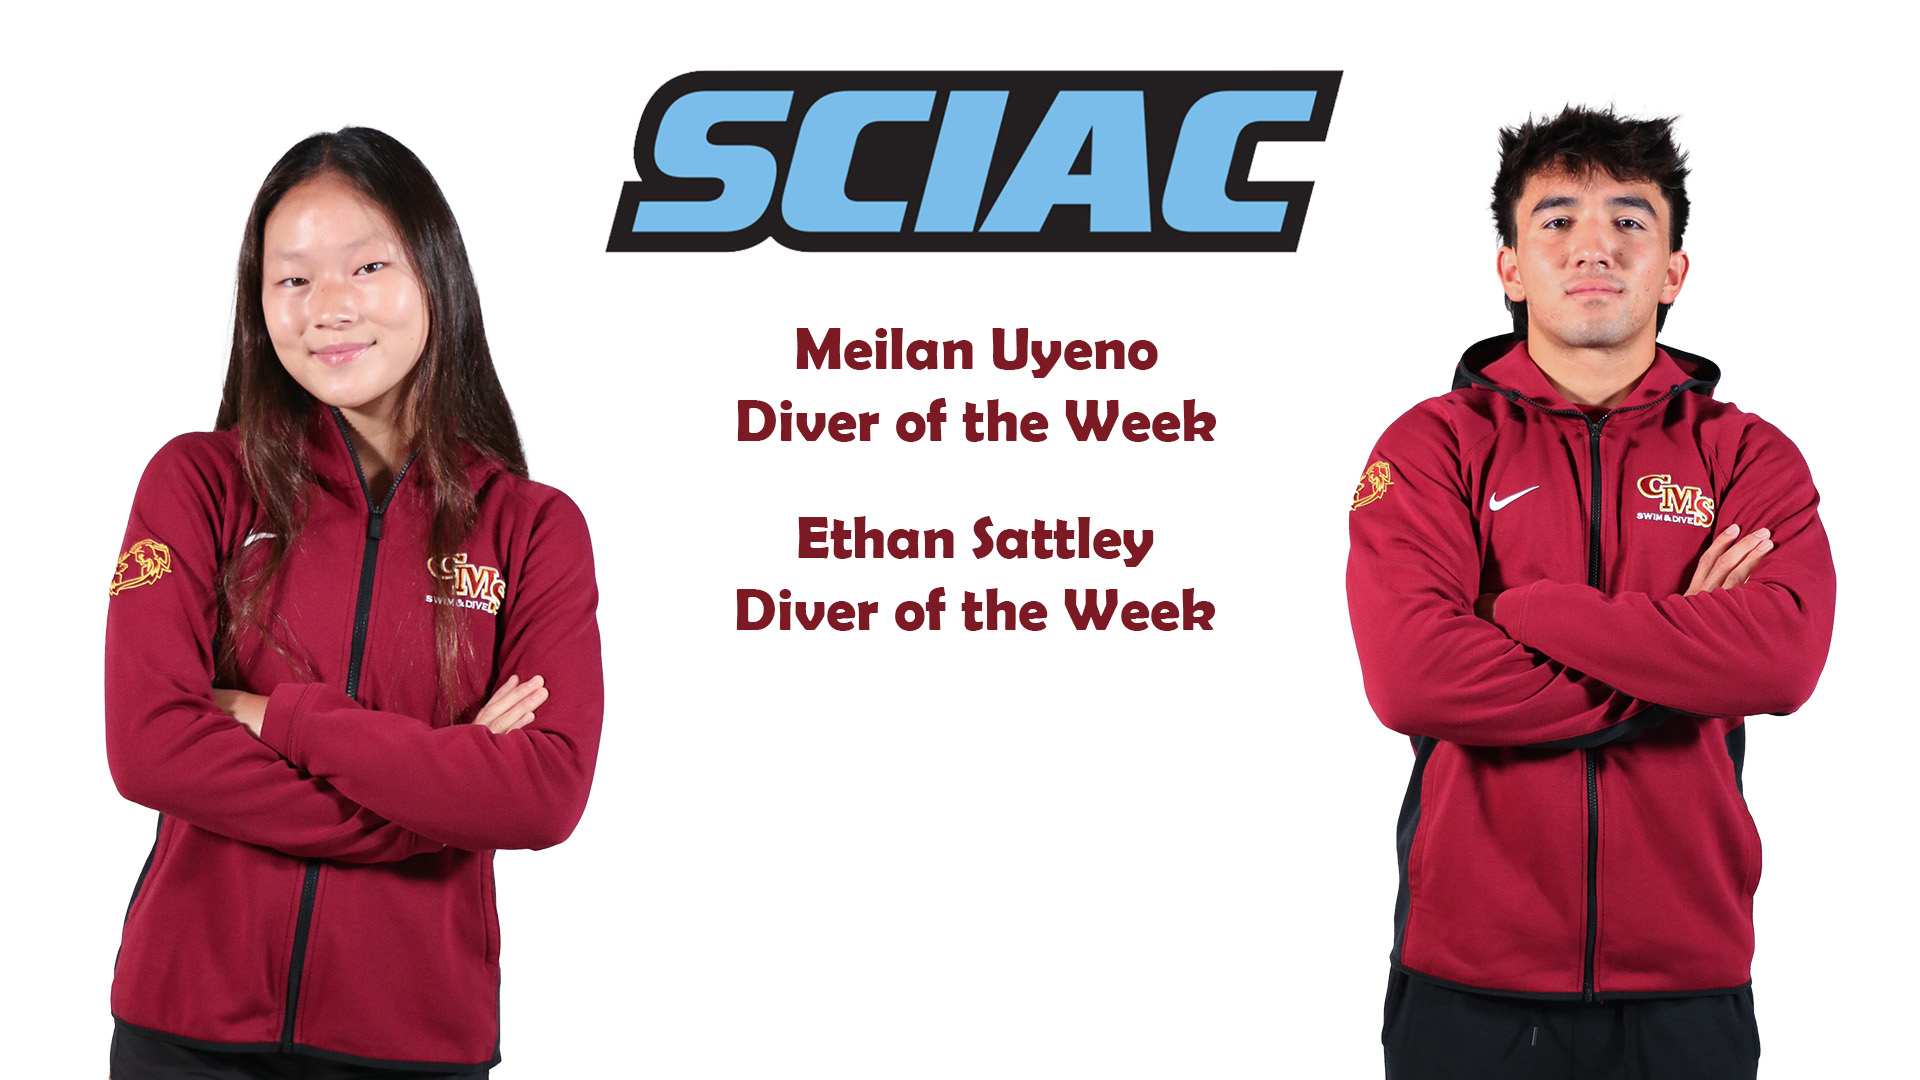 Posed shots of Meilan Uyeno and Ethan Sattley with the SCIAC logo